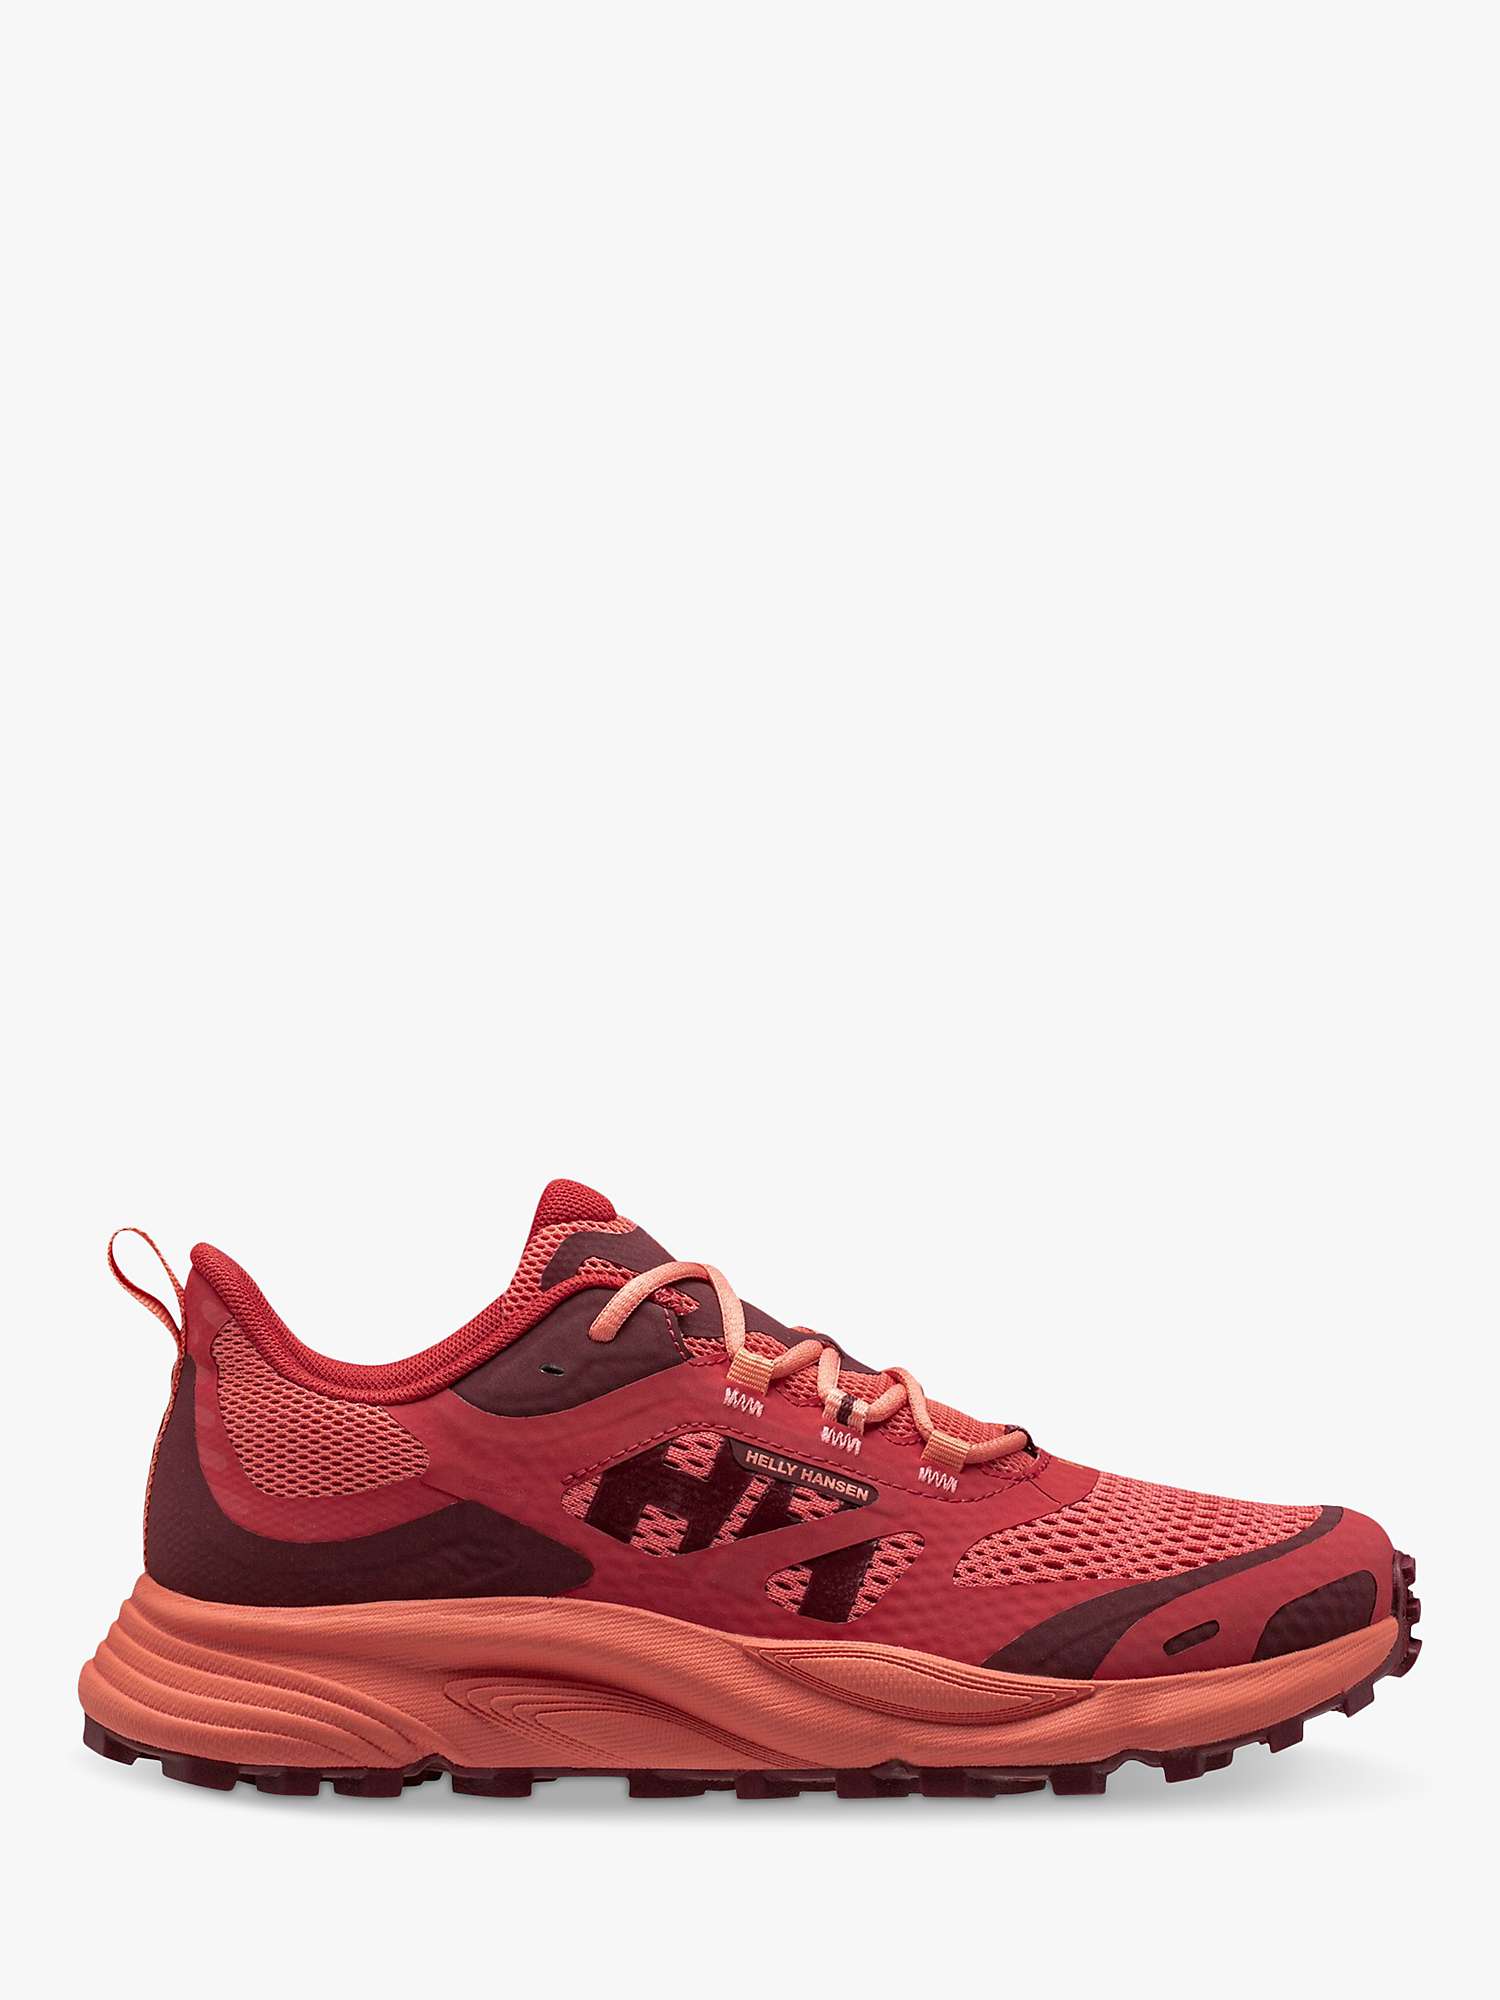 Buy Helly Hansen Trail Wizard Running Shoes Online at johnlewis.com